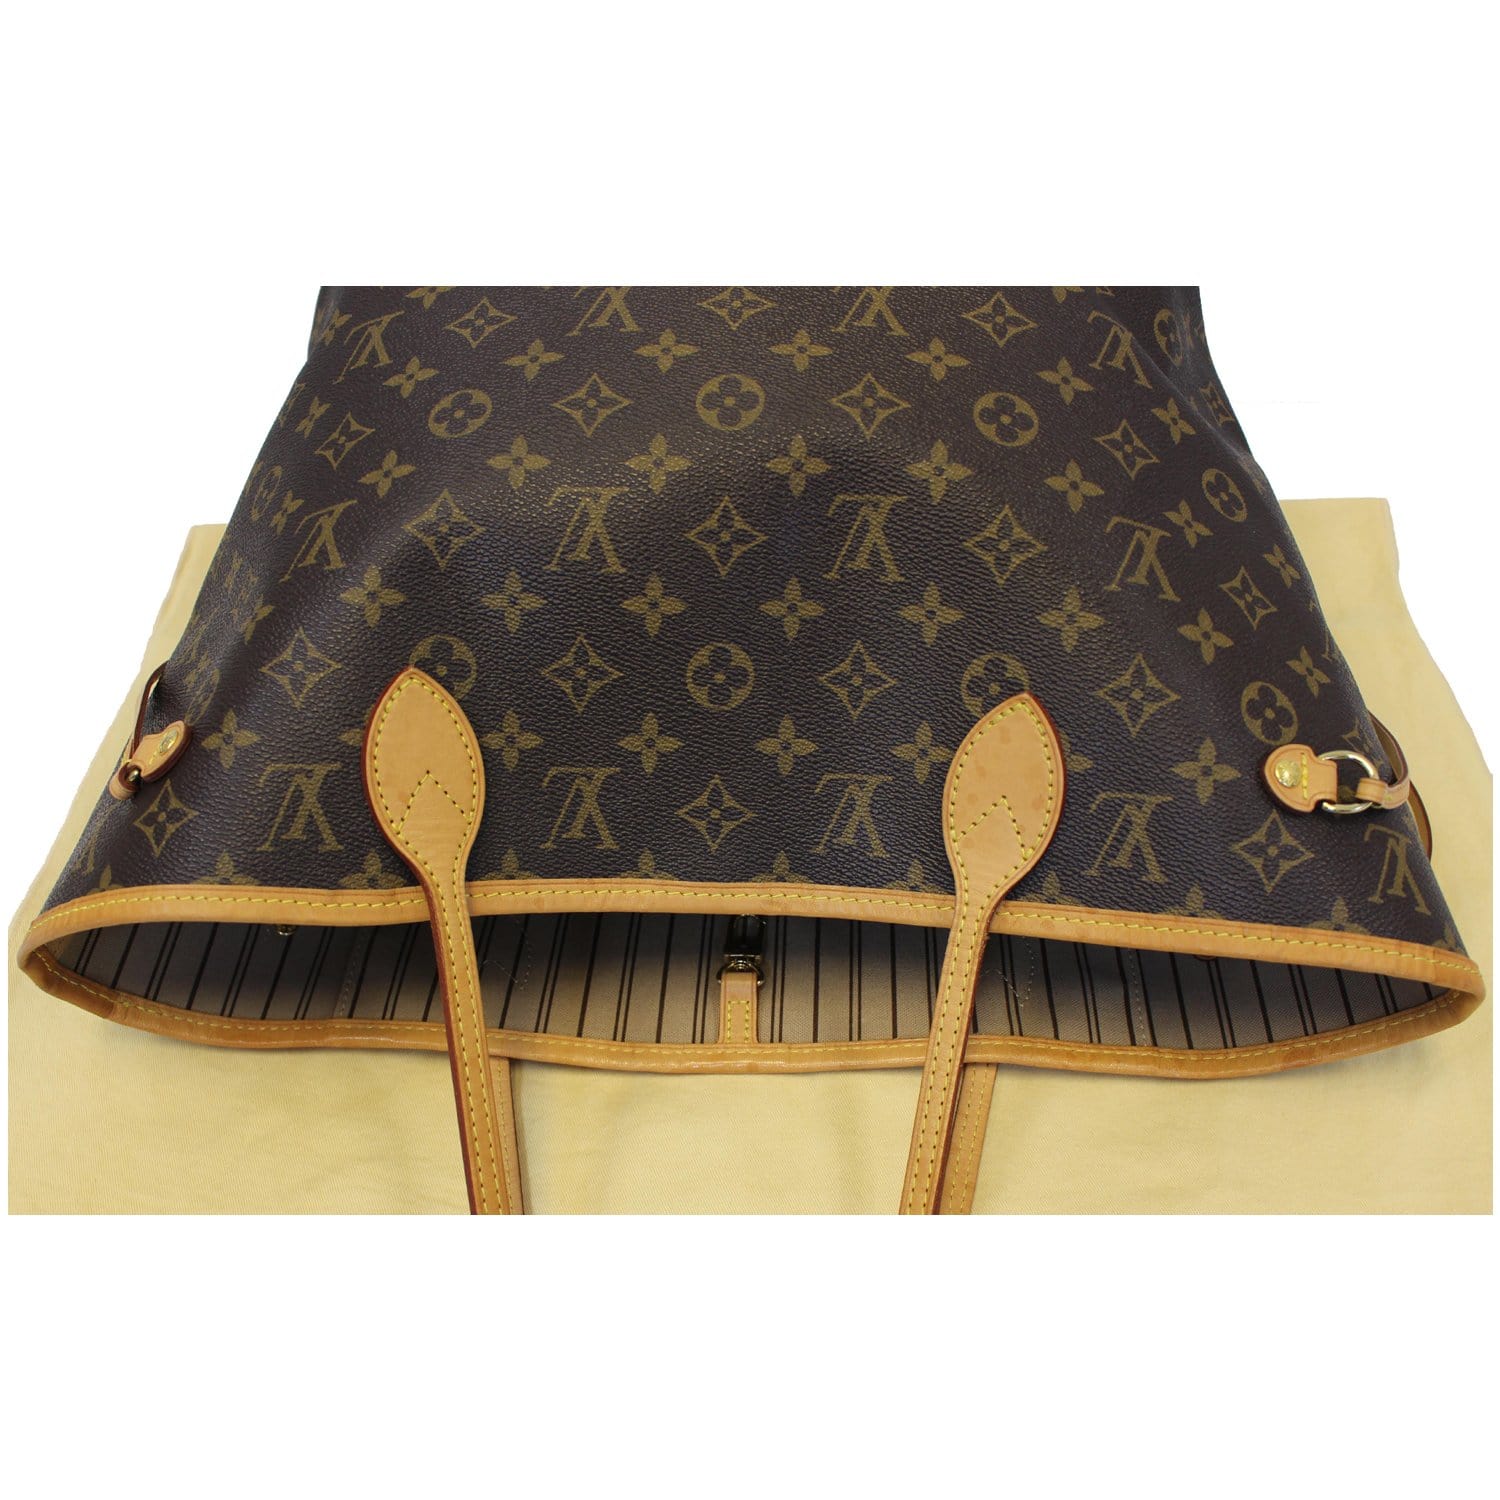 How to spot fake Louis Vuitton Neverfull, Buy & Sell Gold & Branded  Watches, Bags